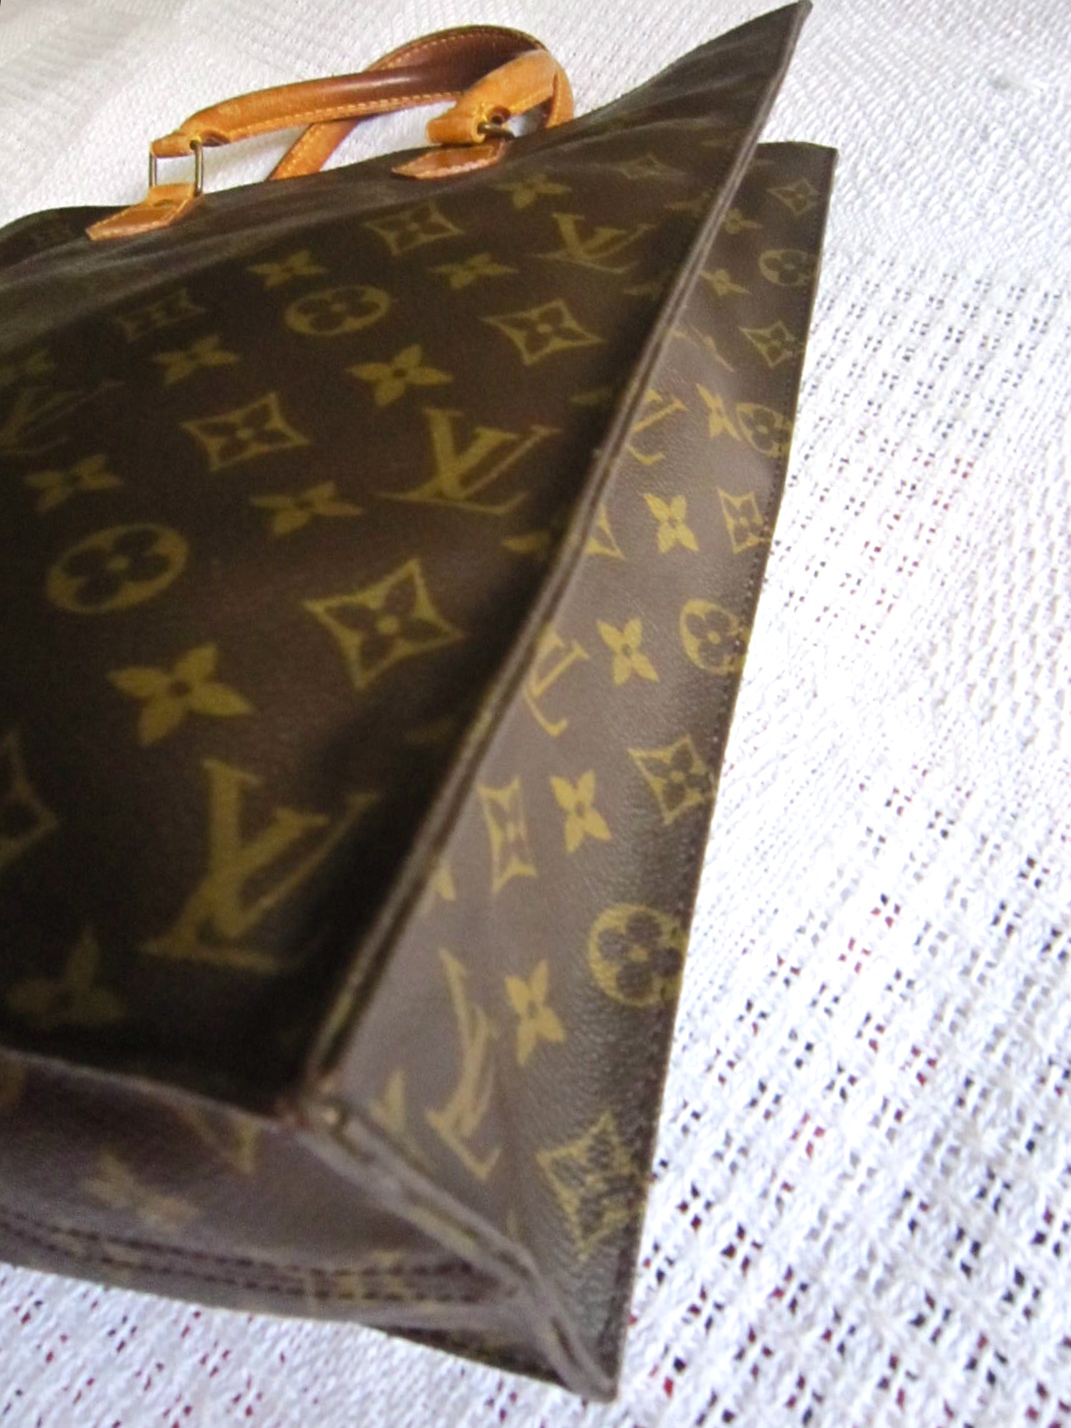 Used Brown Louis Vuitton Authentic Sac Plat Top Handle Tote Bag